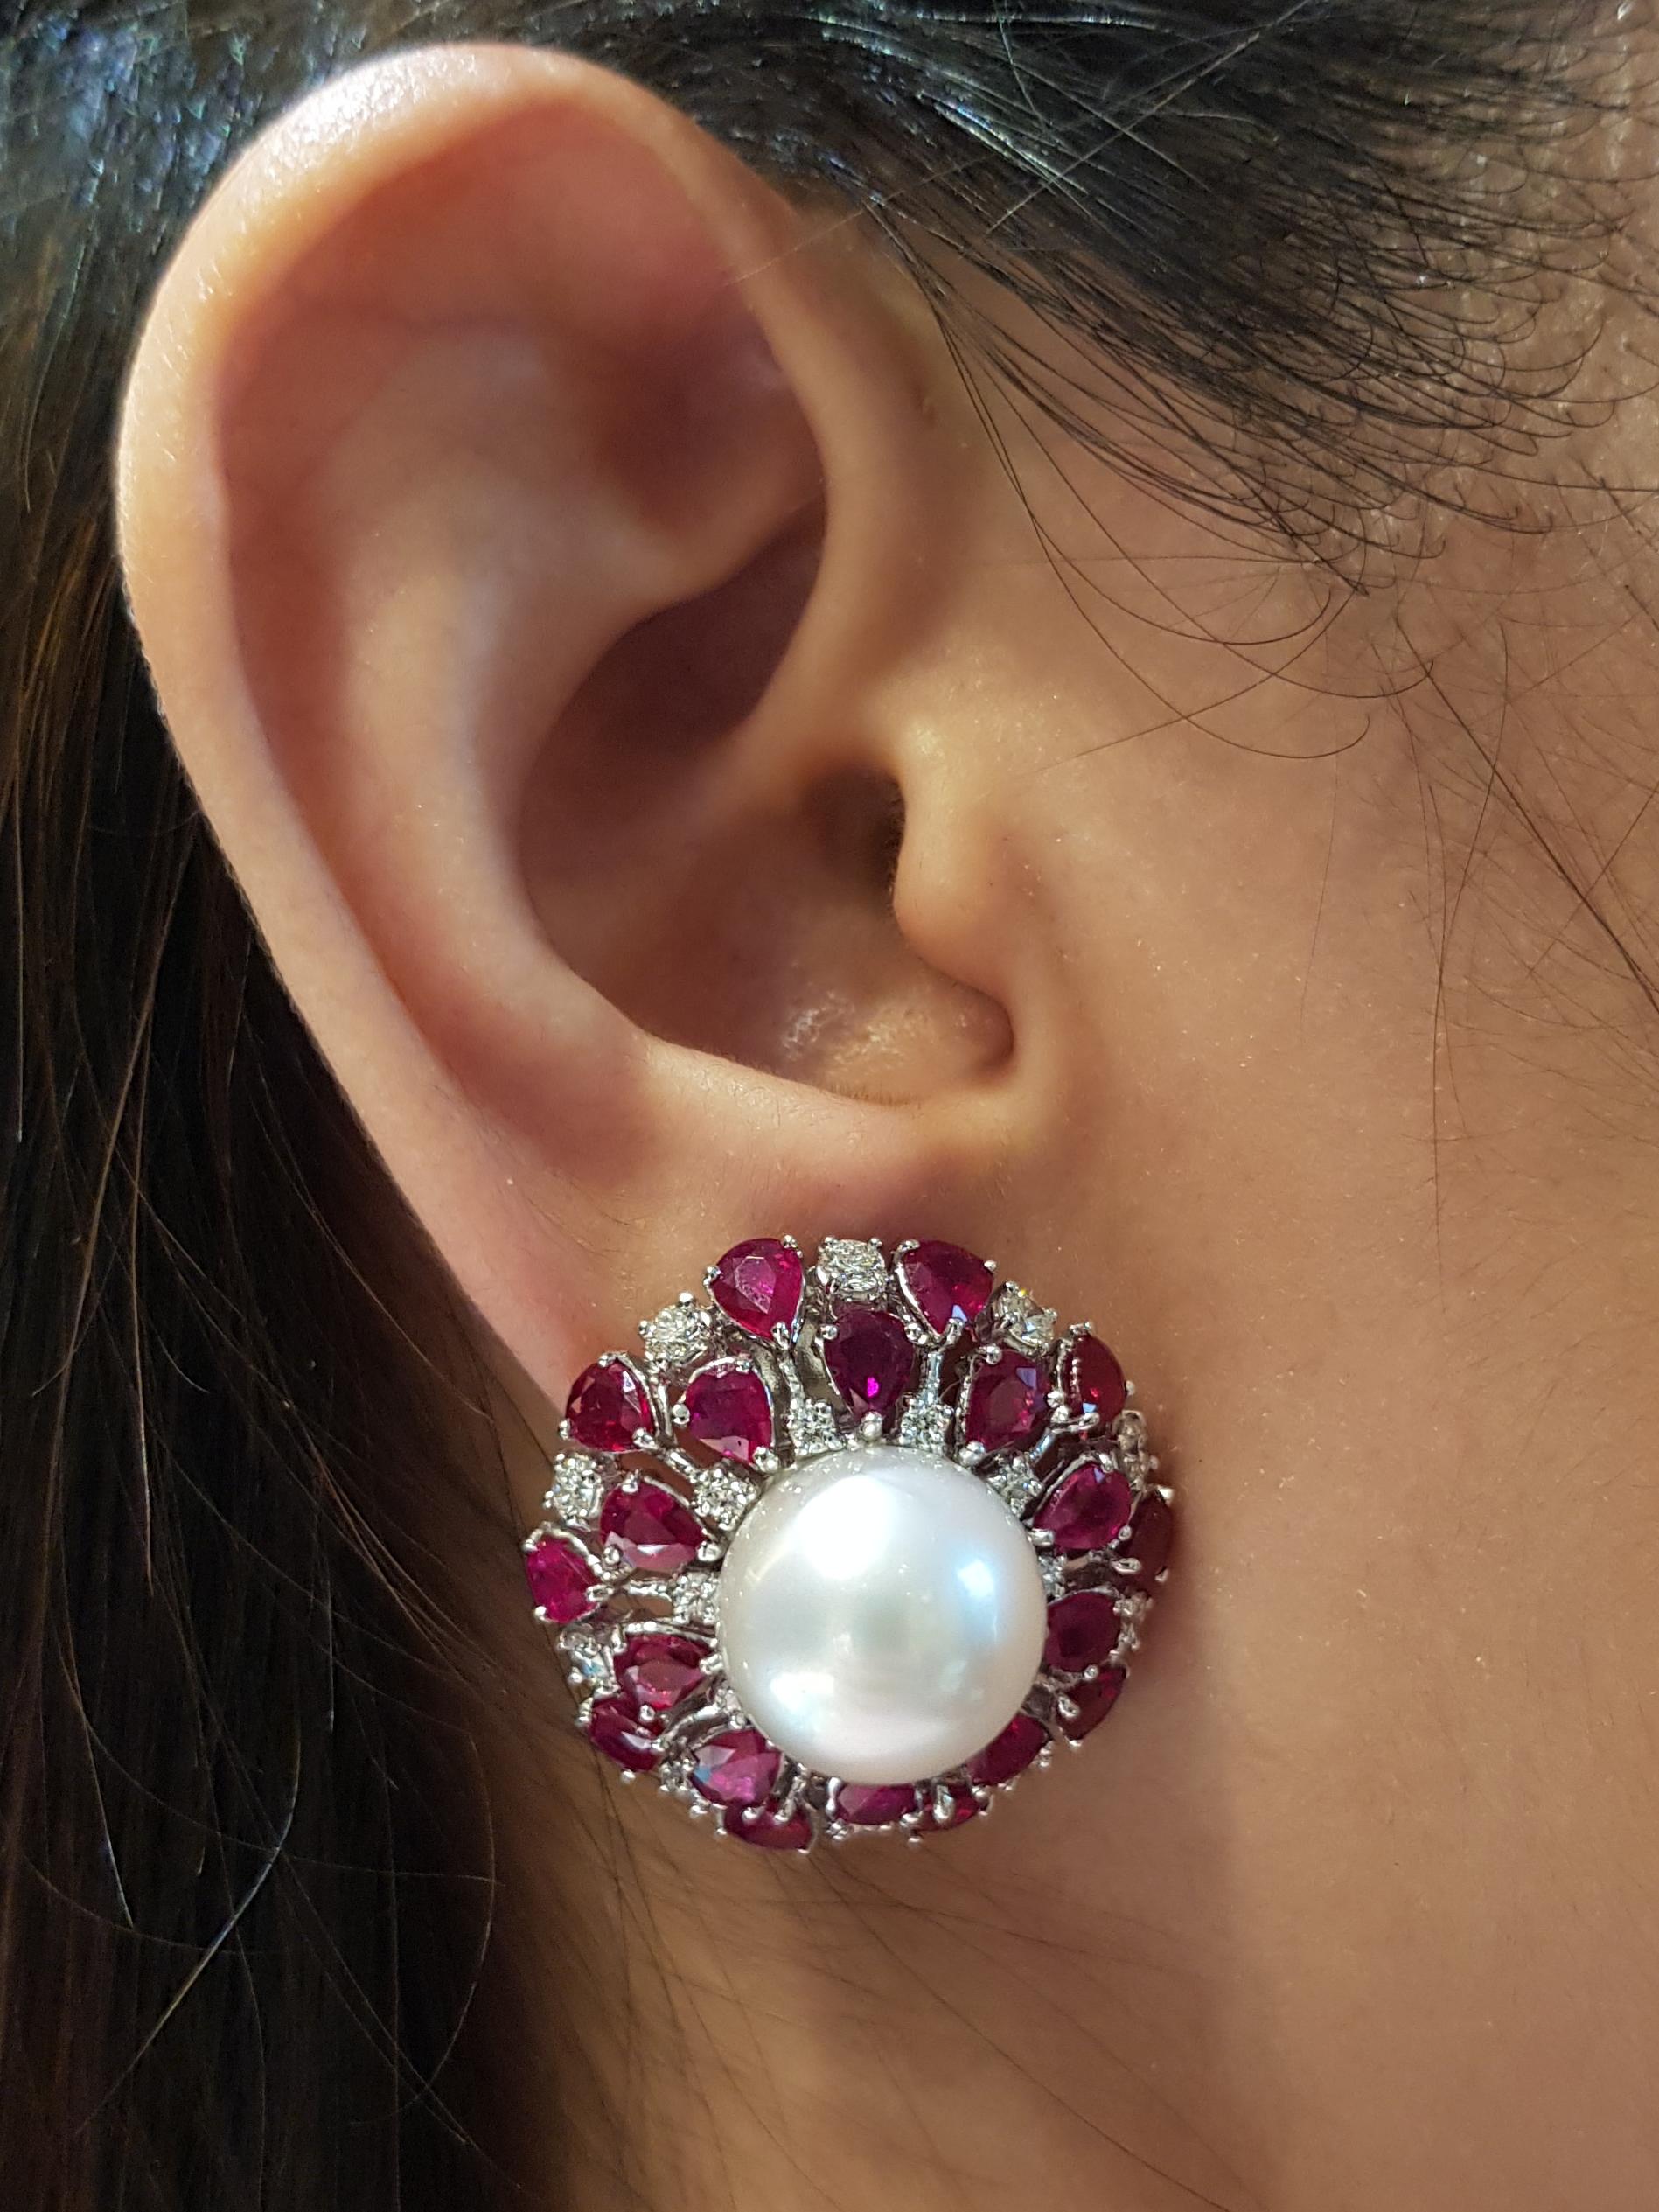 South Sea Pearl with Ruby 8.0 carats and Diamond 1.30 carats Earrings set in 18 Karat White Gold Settings

Width: 2.6 cm 
Length:  2.6 cm
Total Weight: 24.46 grams

